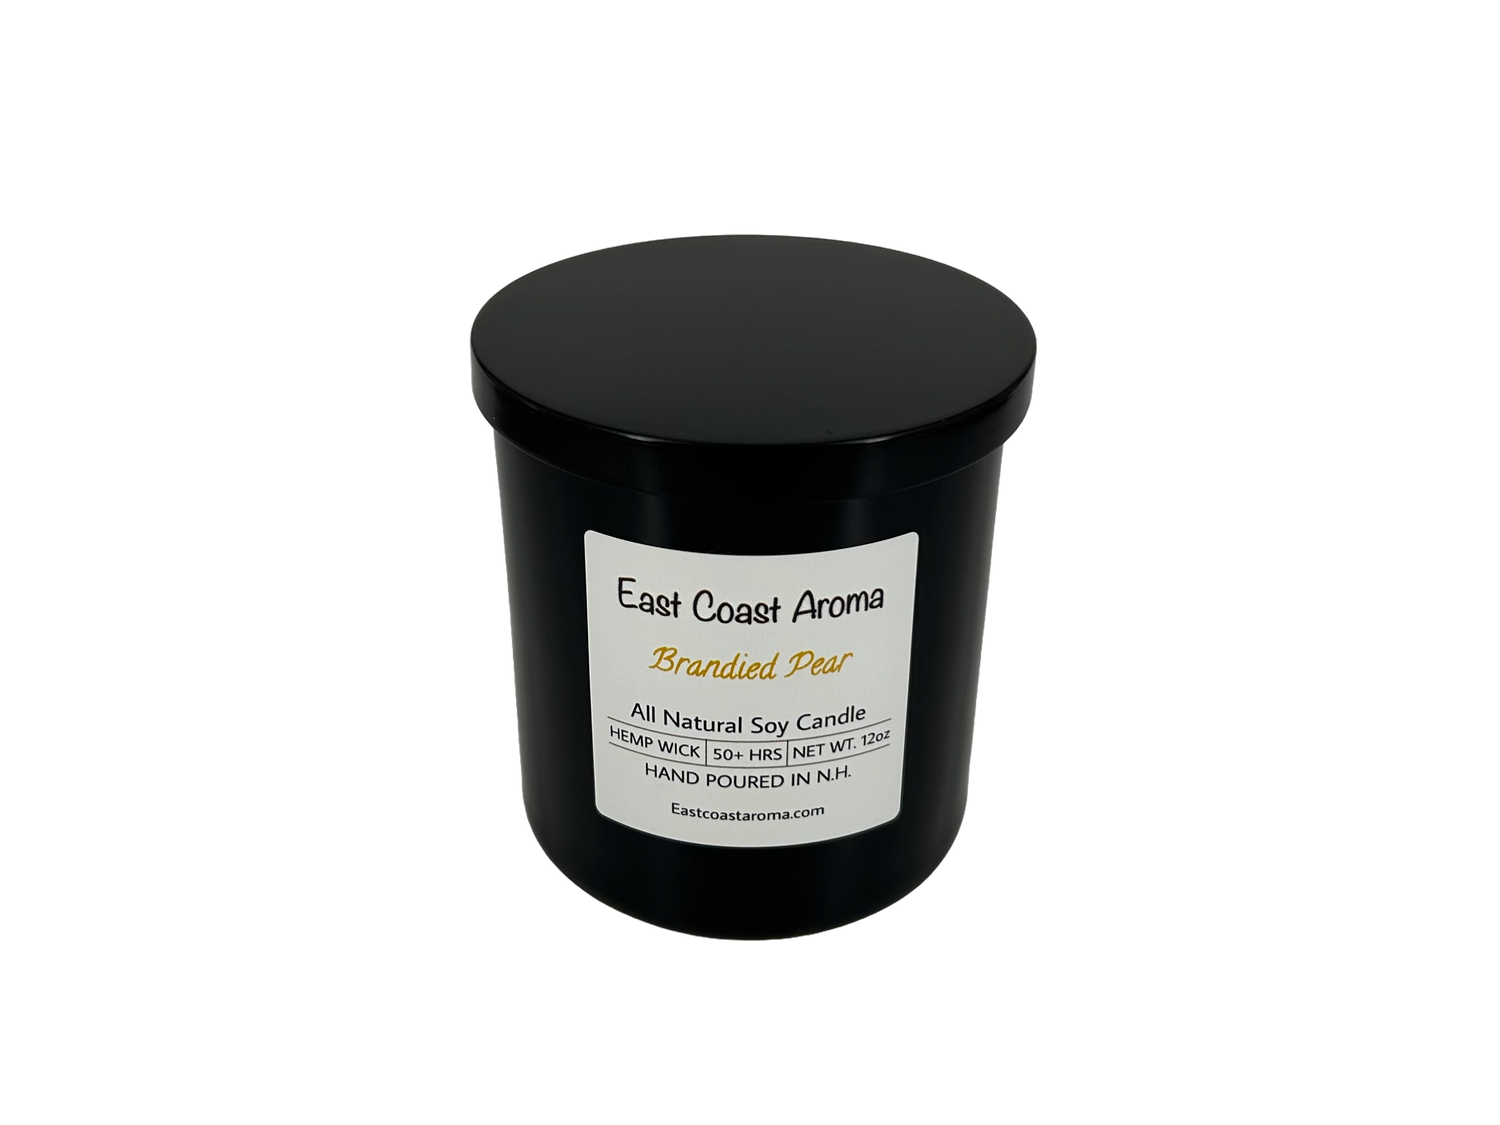 12oz Brandied Pear Soy Candle